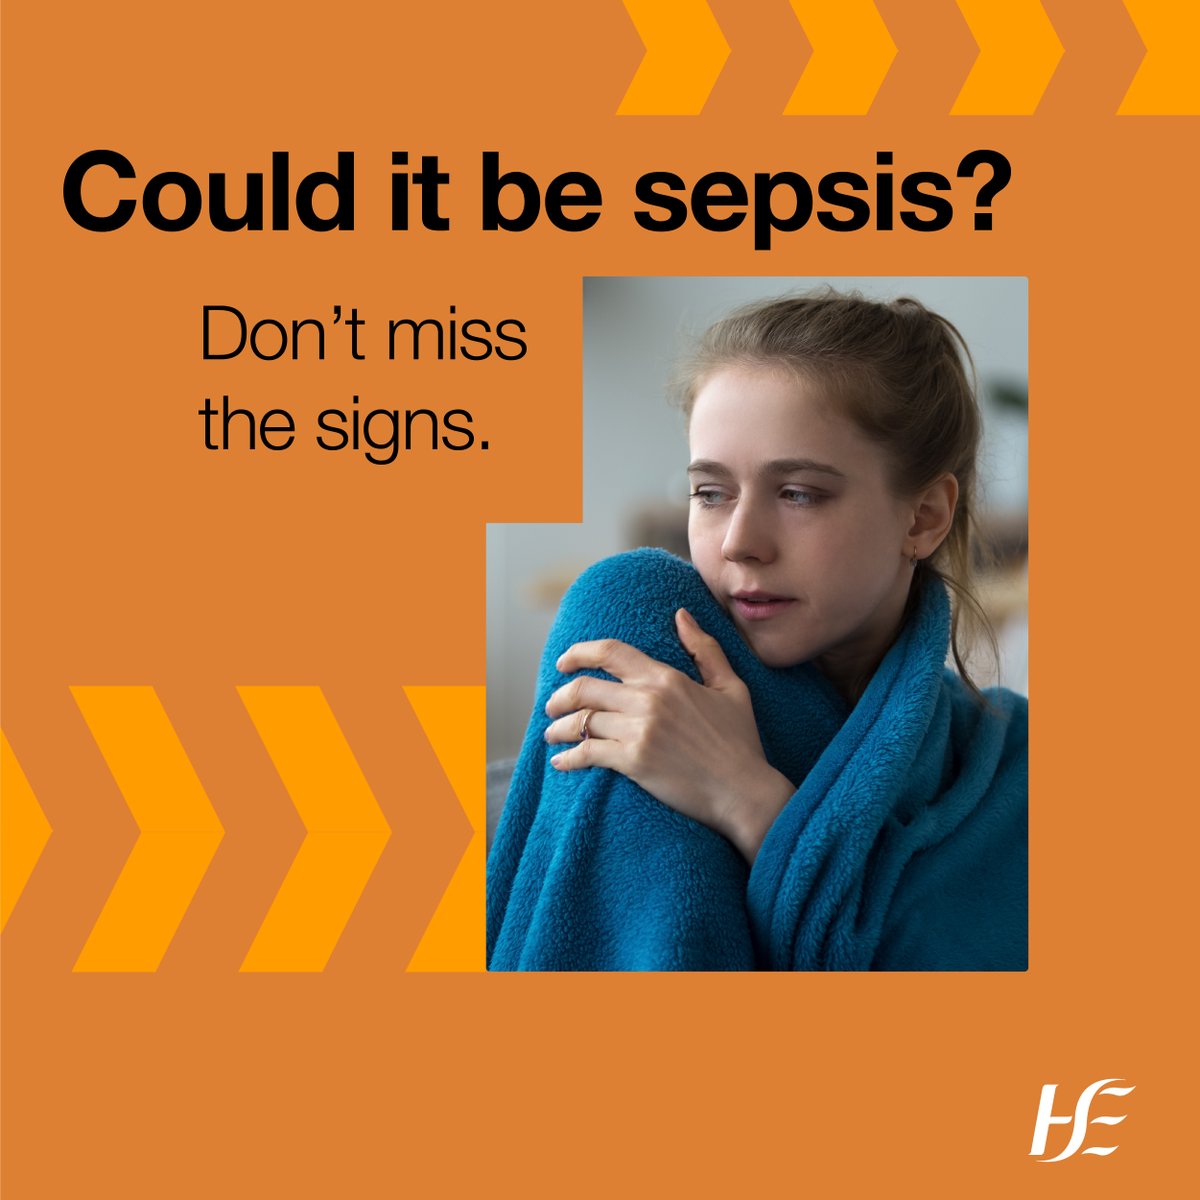 Sepsis is a life-threatening complication of an infection. If you've just been pregnant or had a baby, you're more at risk of an infection that could lead to sepsis. Don’t miss the signs. For more information, visit: bit.ly/3ylaB2j #Sepsis